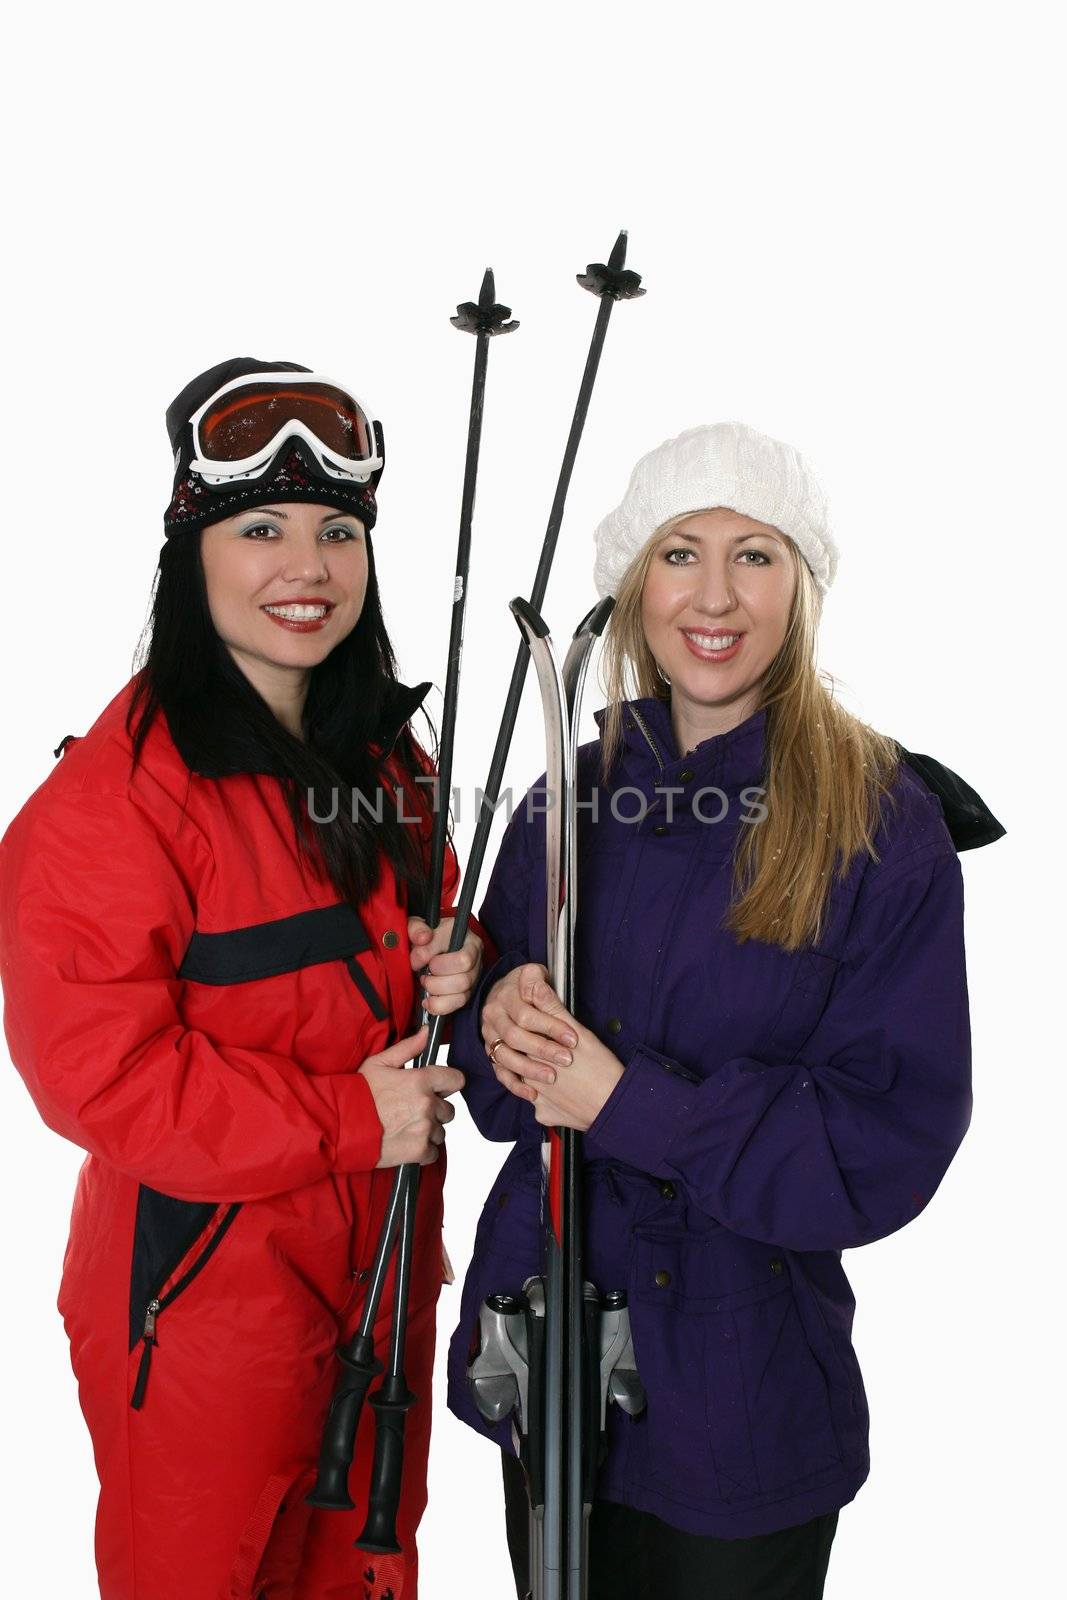 Two women ready to go skiing in winter.